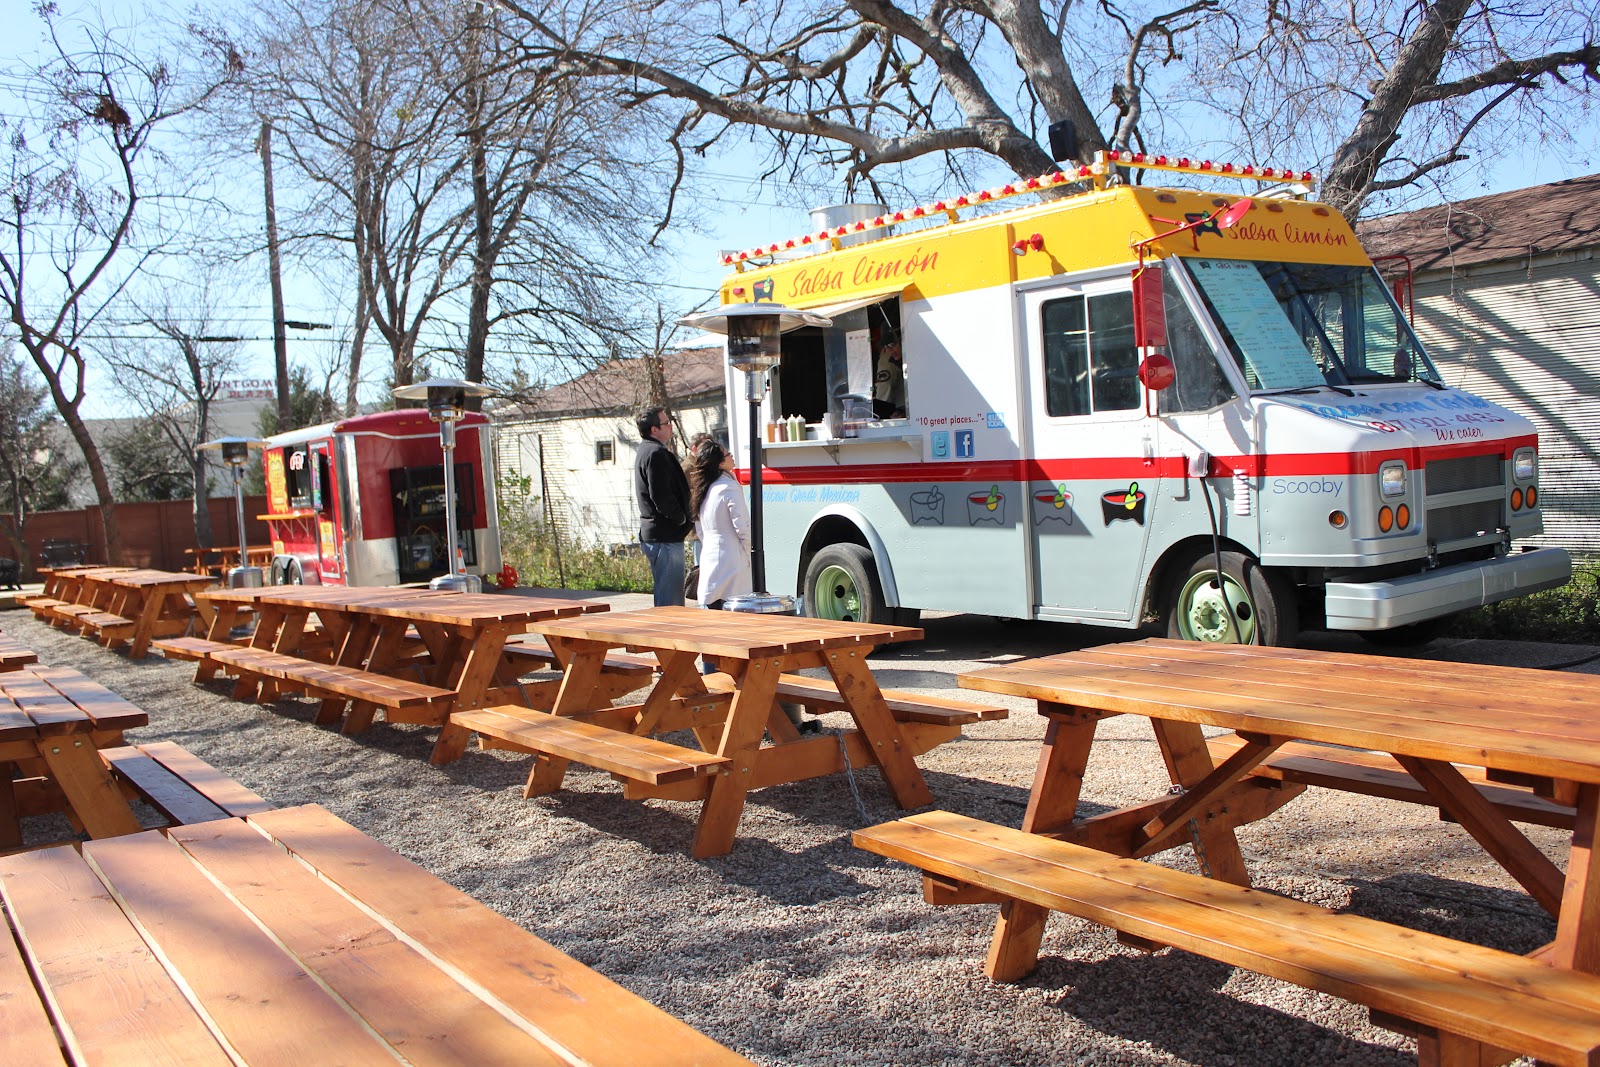 Oh Lordy!: 30 Before 30: Food Truck Park